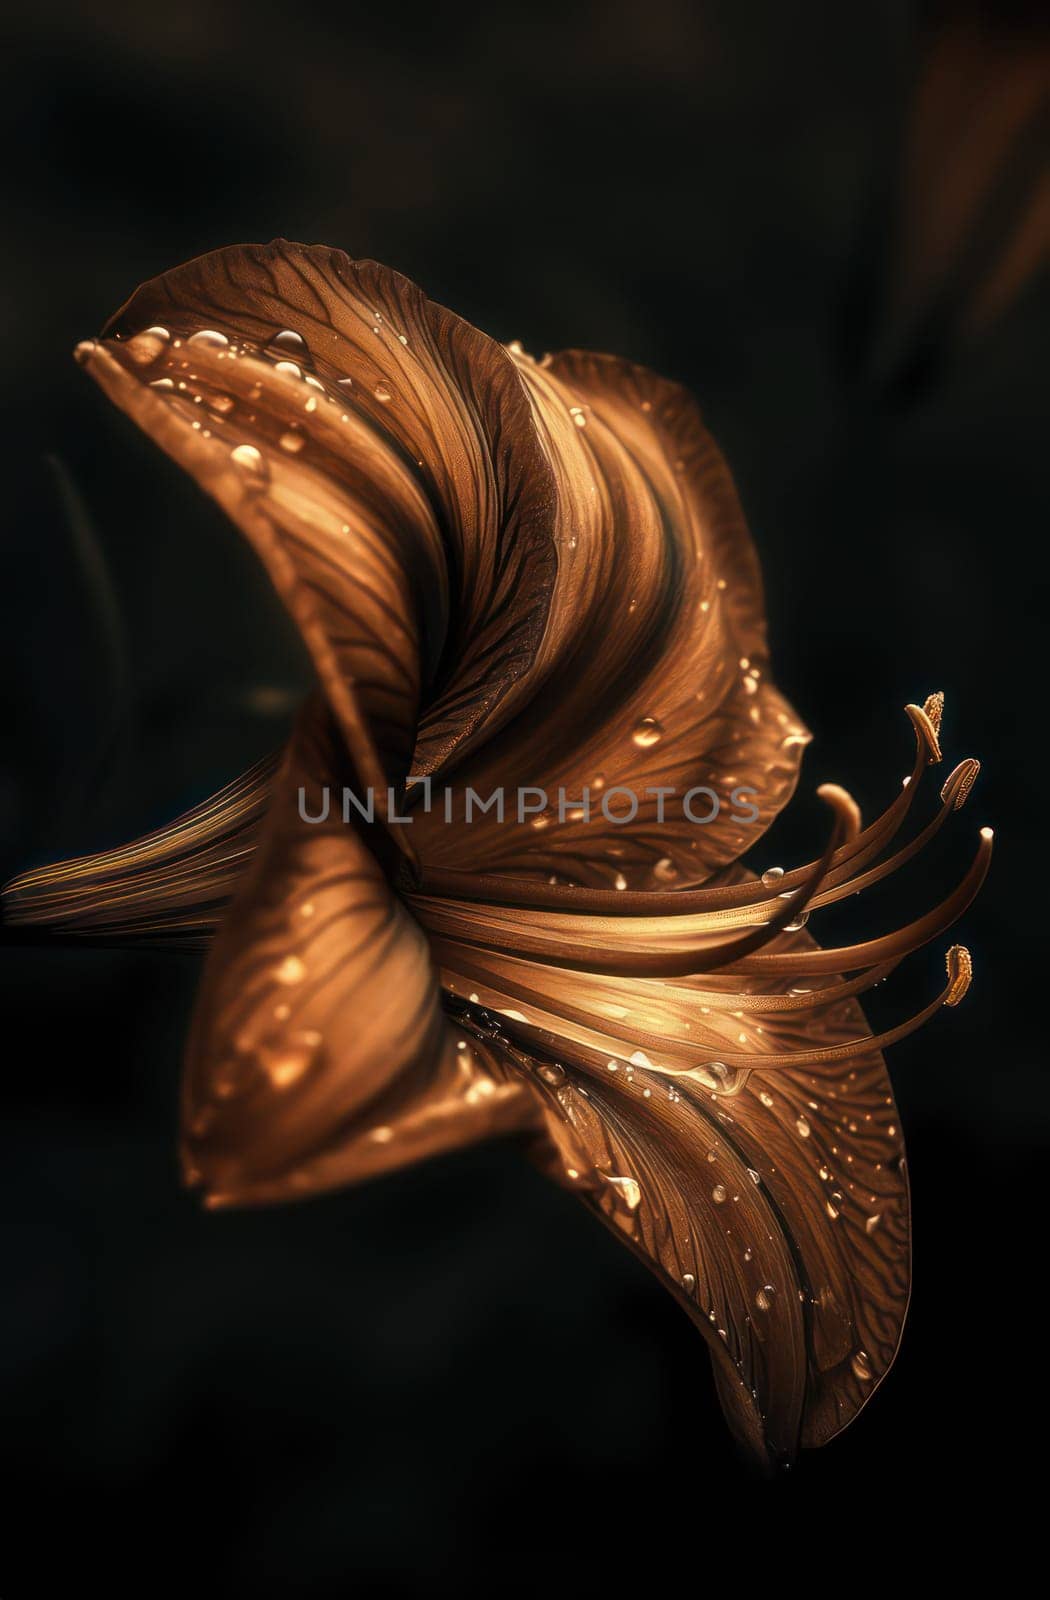 Majestic Bronze Lily with Dewdrops, Dark Elegance in Floral Photography